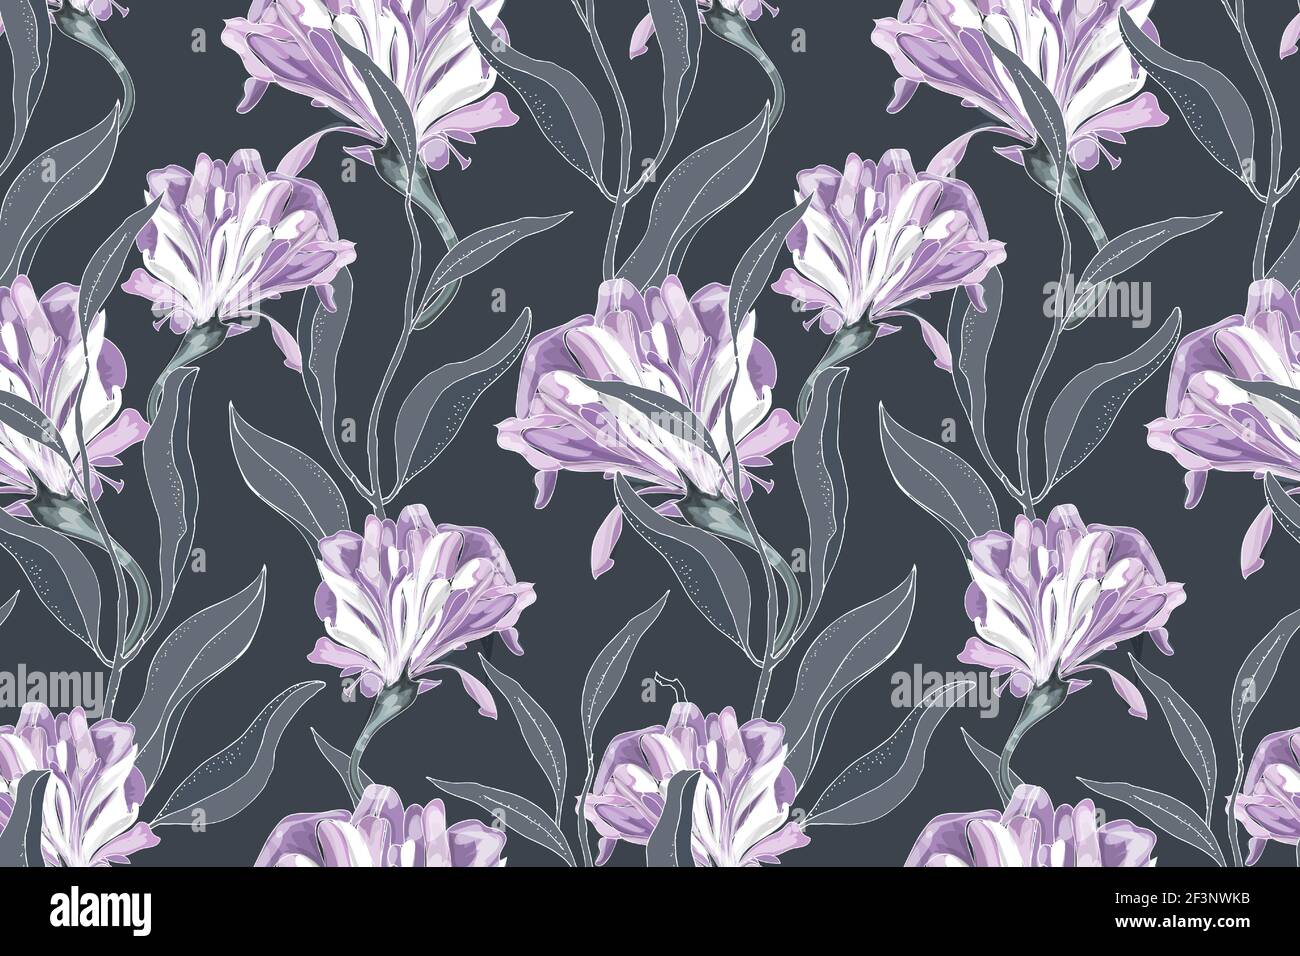 Art floral vector seamless pattern. Delicate purple Ipomoea, morning glory, isolated on a deep grey background. Curly flowers with grey leaves. Stock Vector